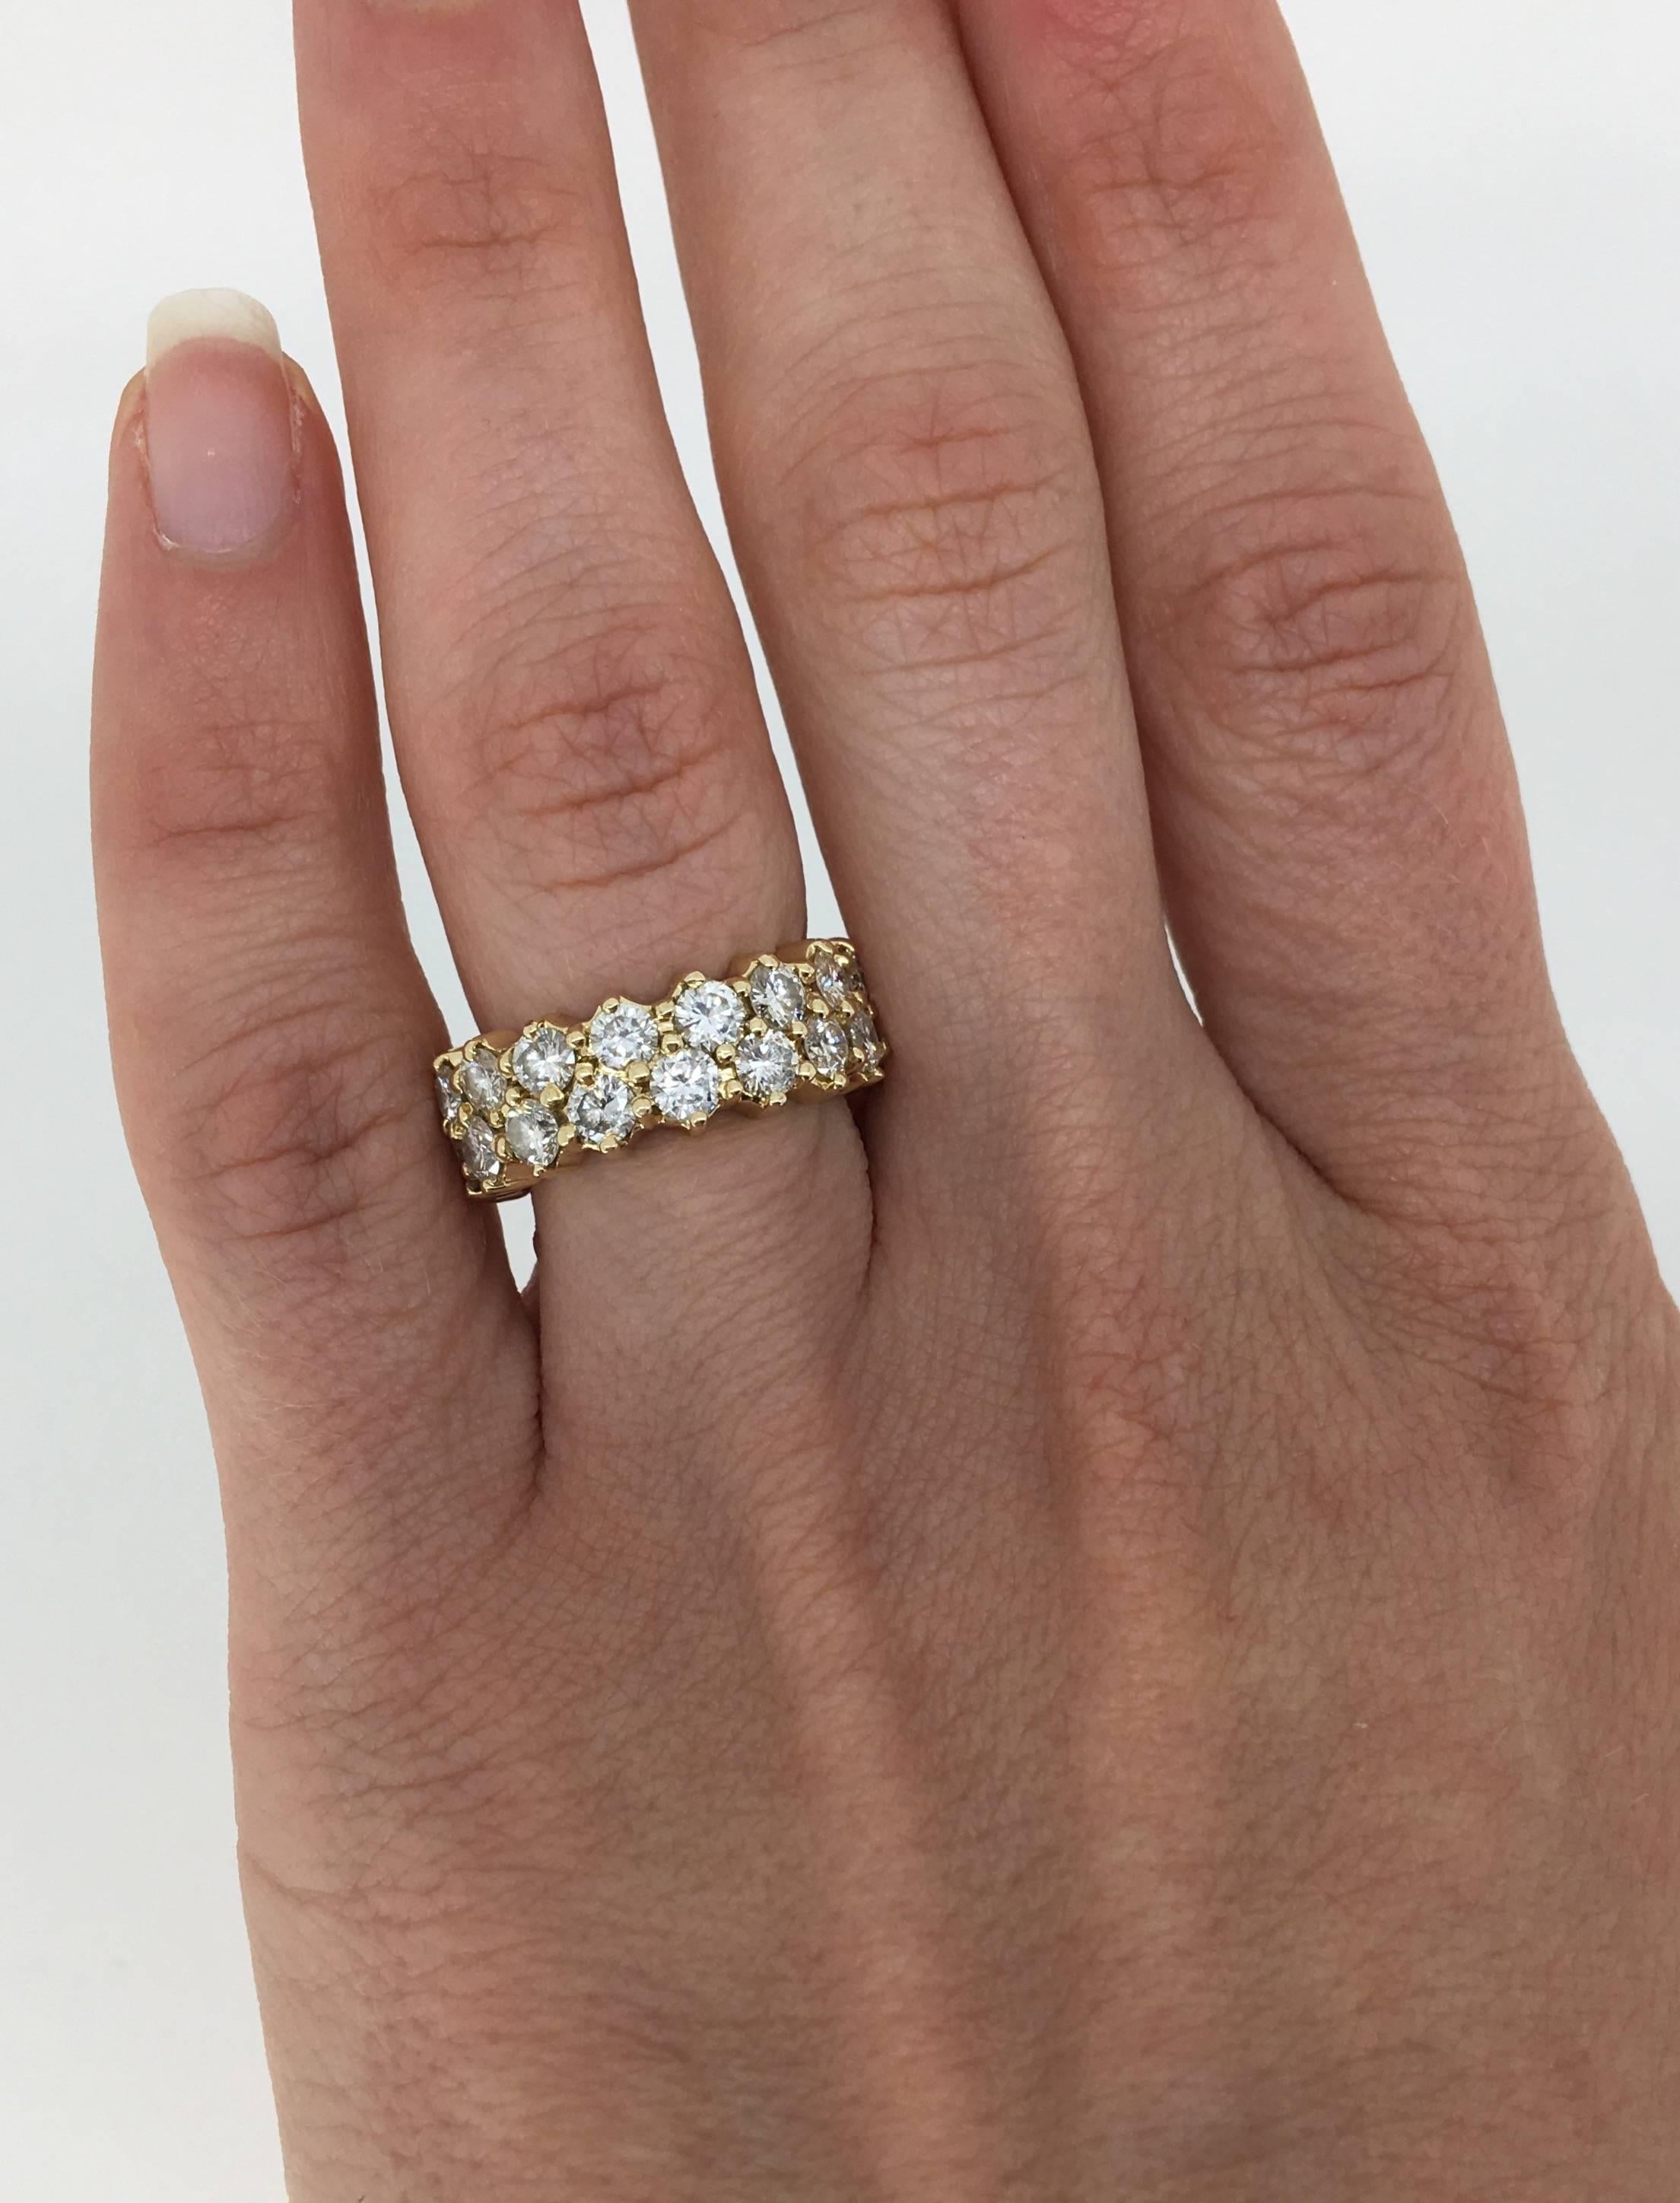 Eternity style diamond ring has two elegant rows of 34 Round Brilliant Cut Diamonds with a total carat weight of approximately 4.50ctw. The diamonds  display an average F-H color and average SI1-SI2 clarity. The 14K yellow gold ring is a size 5 and